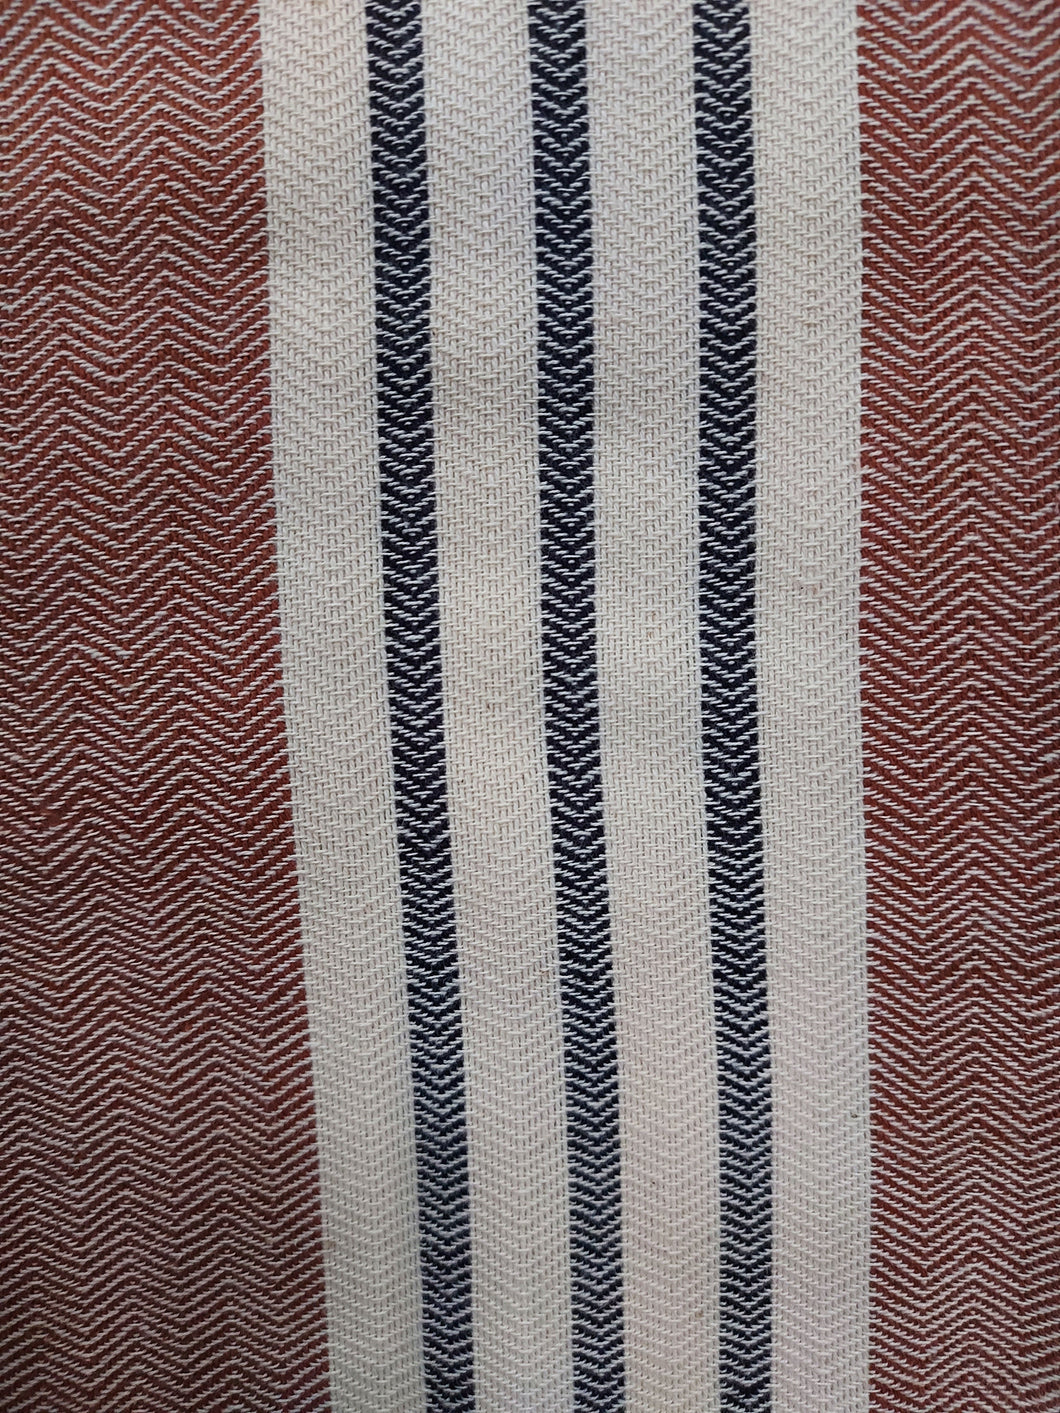 Light Weight Fabric - Patterned